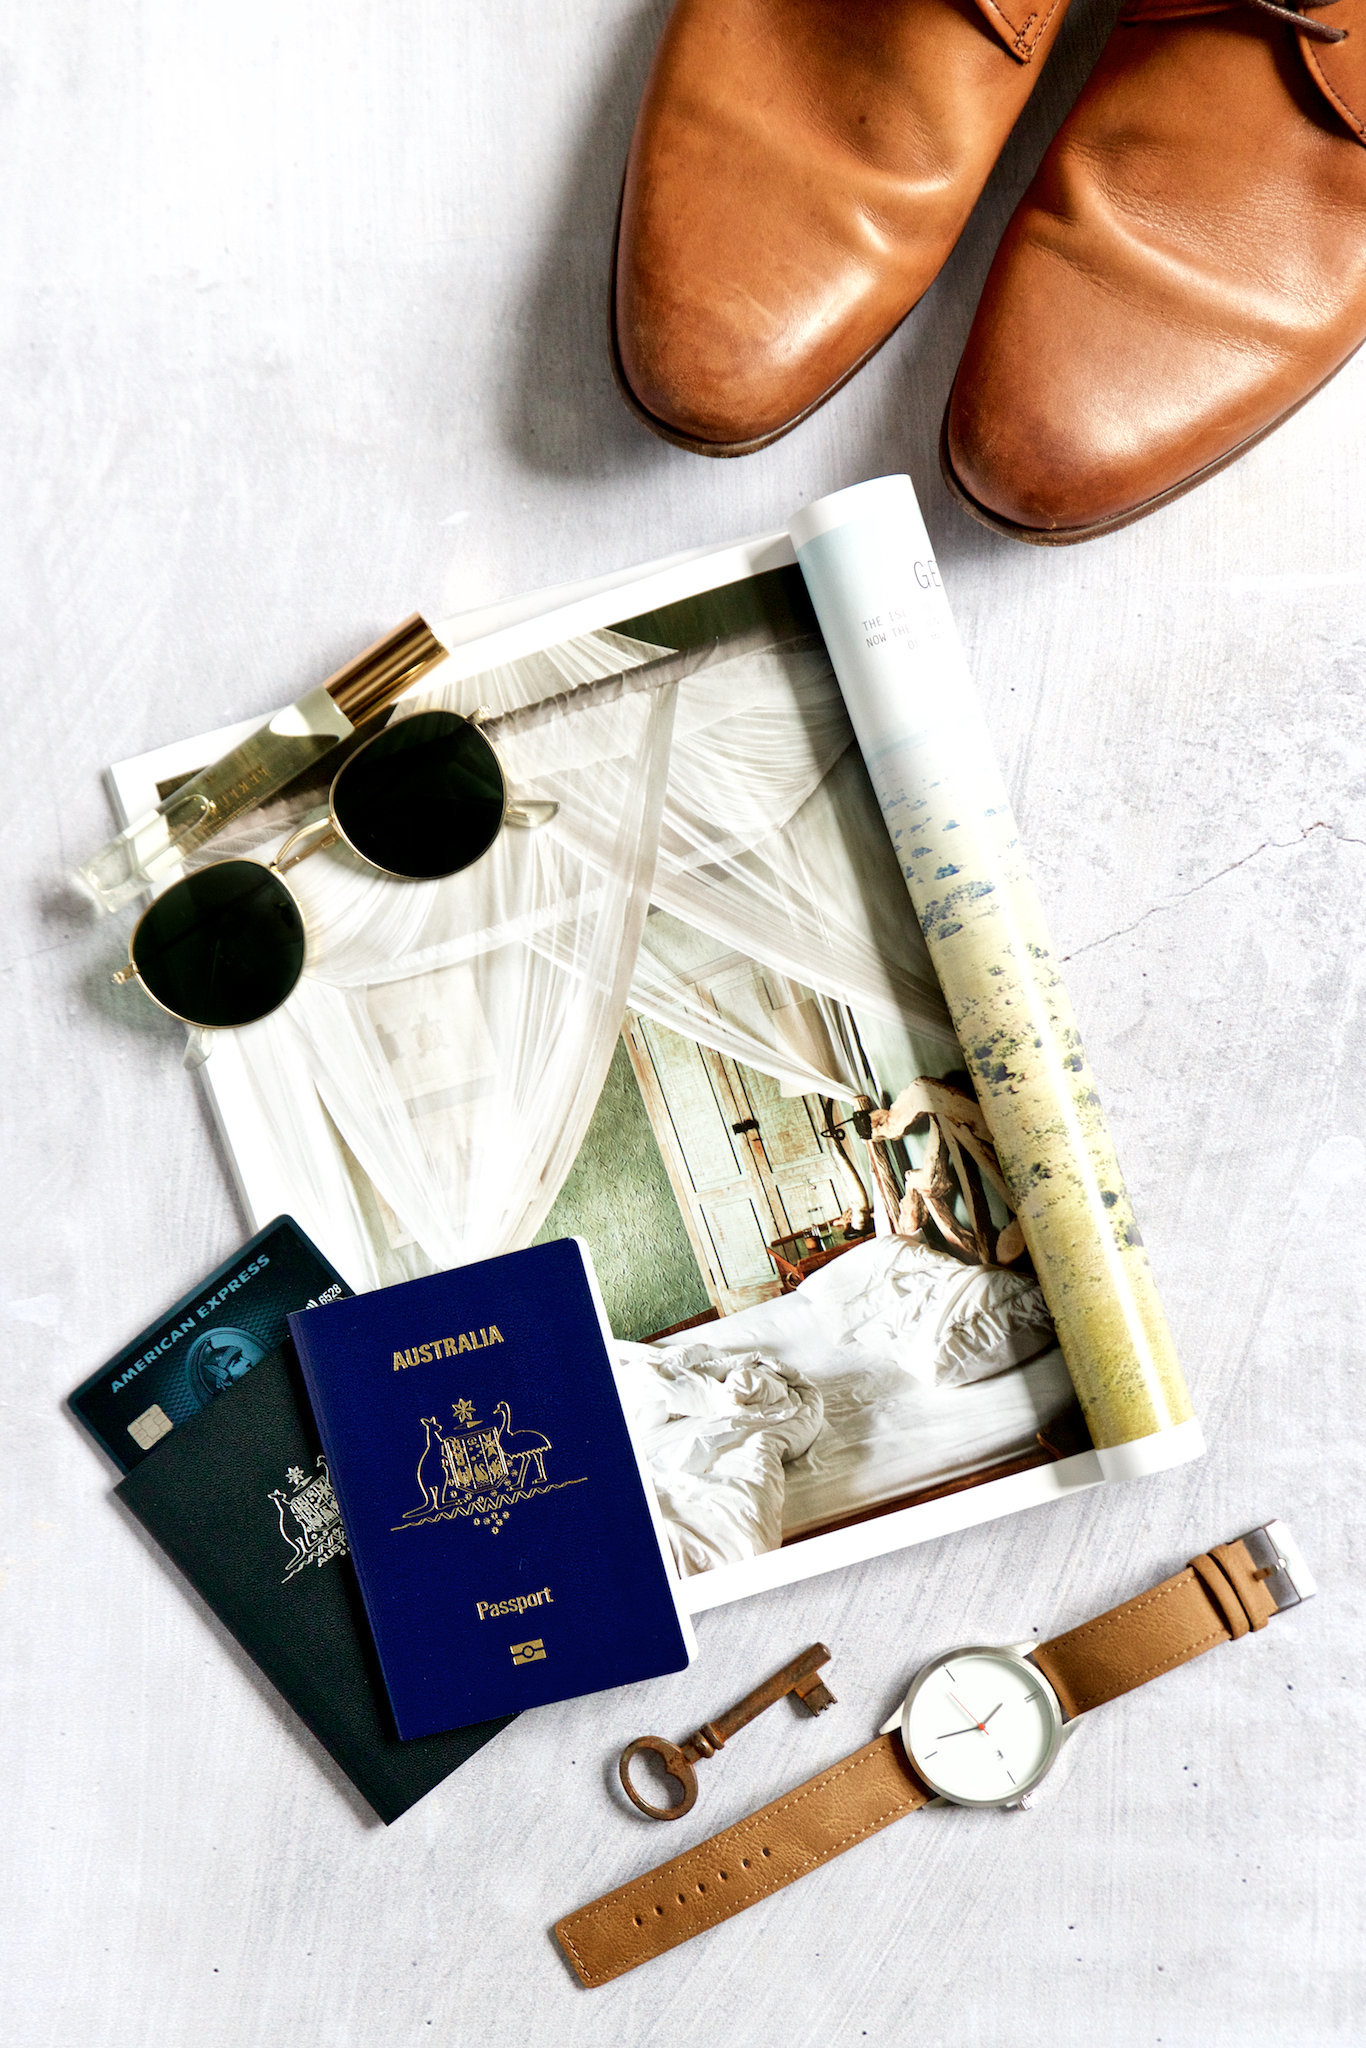 Styled flat lay by branding product photographer Chelsea Loren with passports, magazine, men's shoes, watch for masculine travel flat lay.